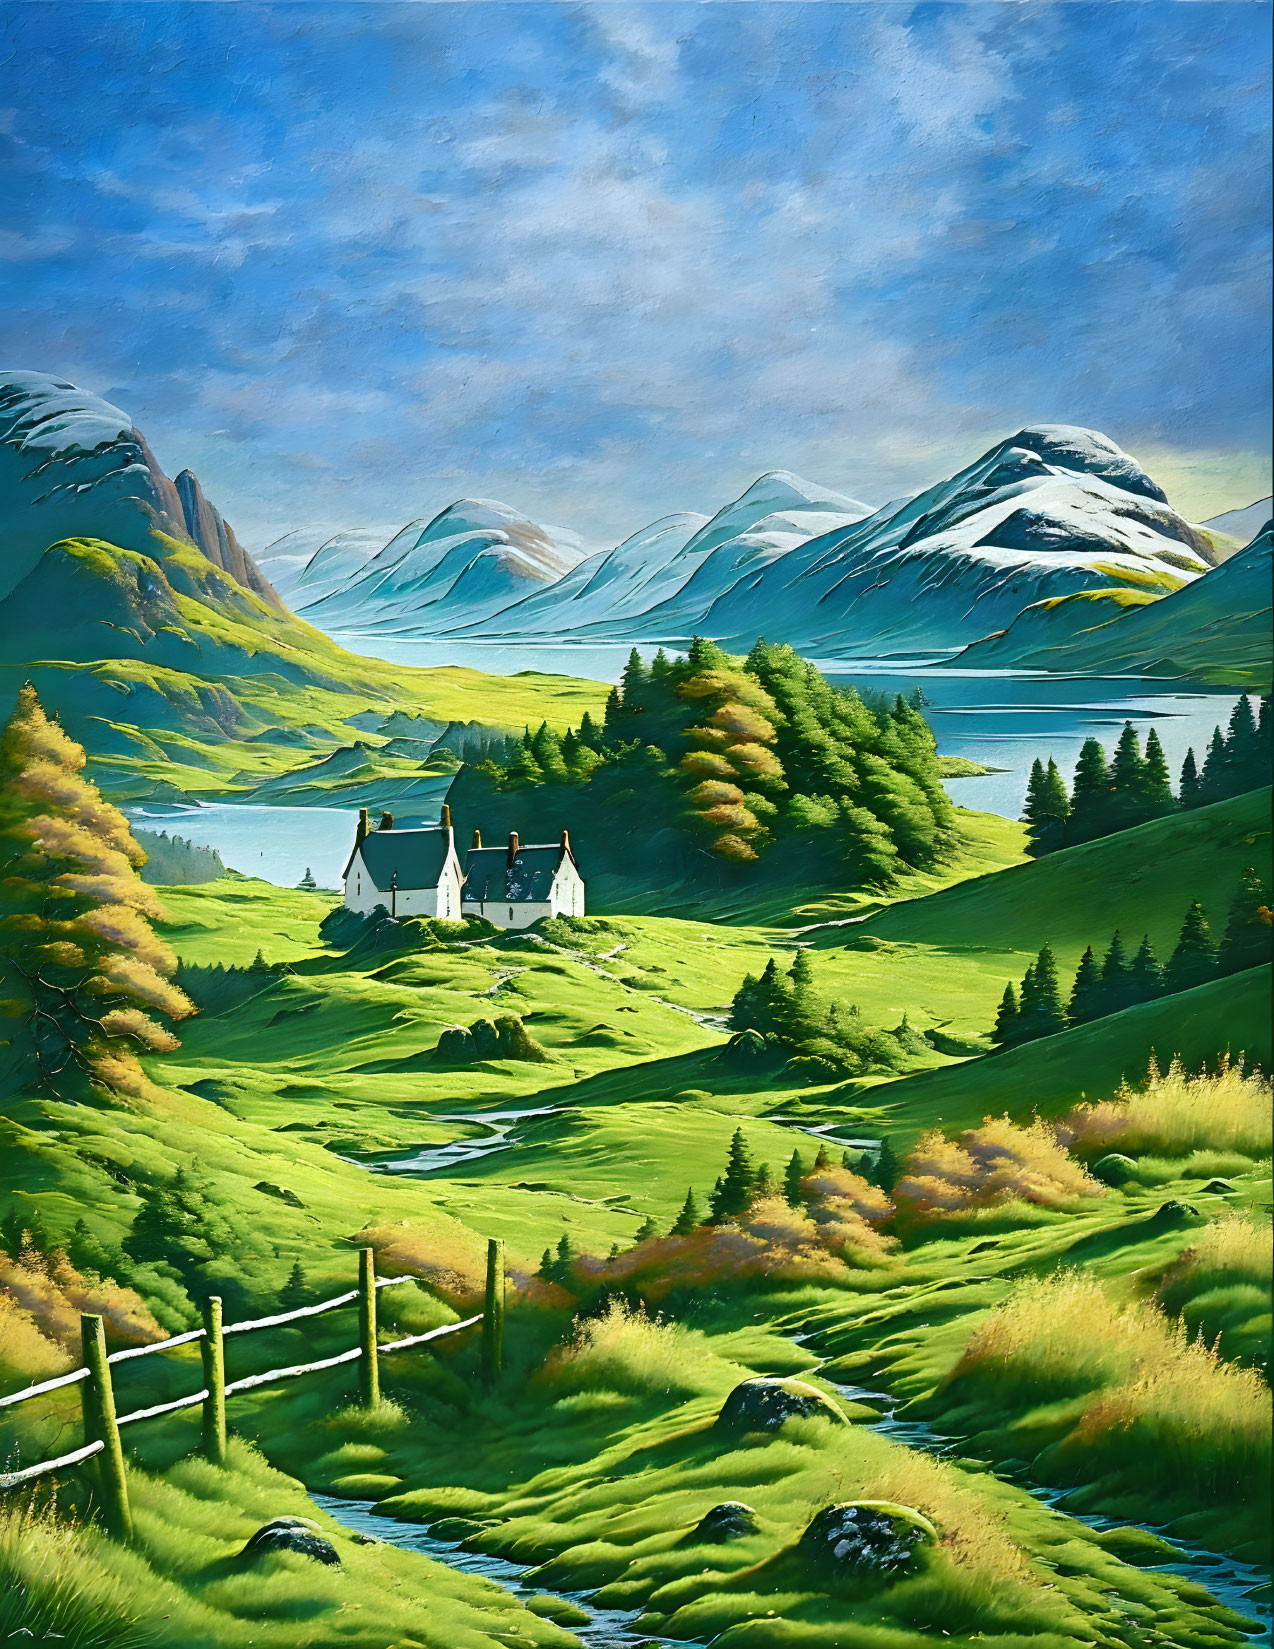 Scottish landscape in the style of Bob Ross